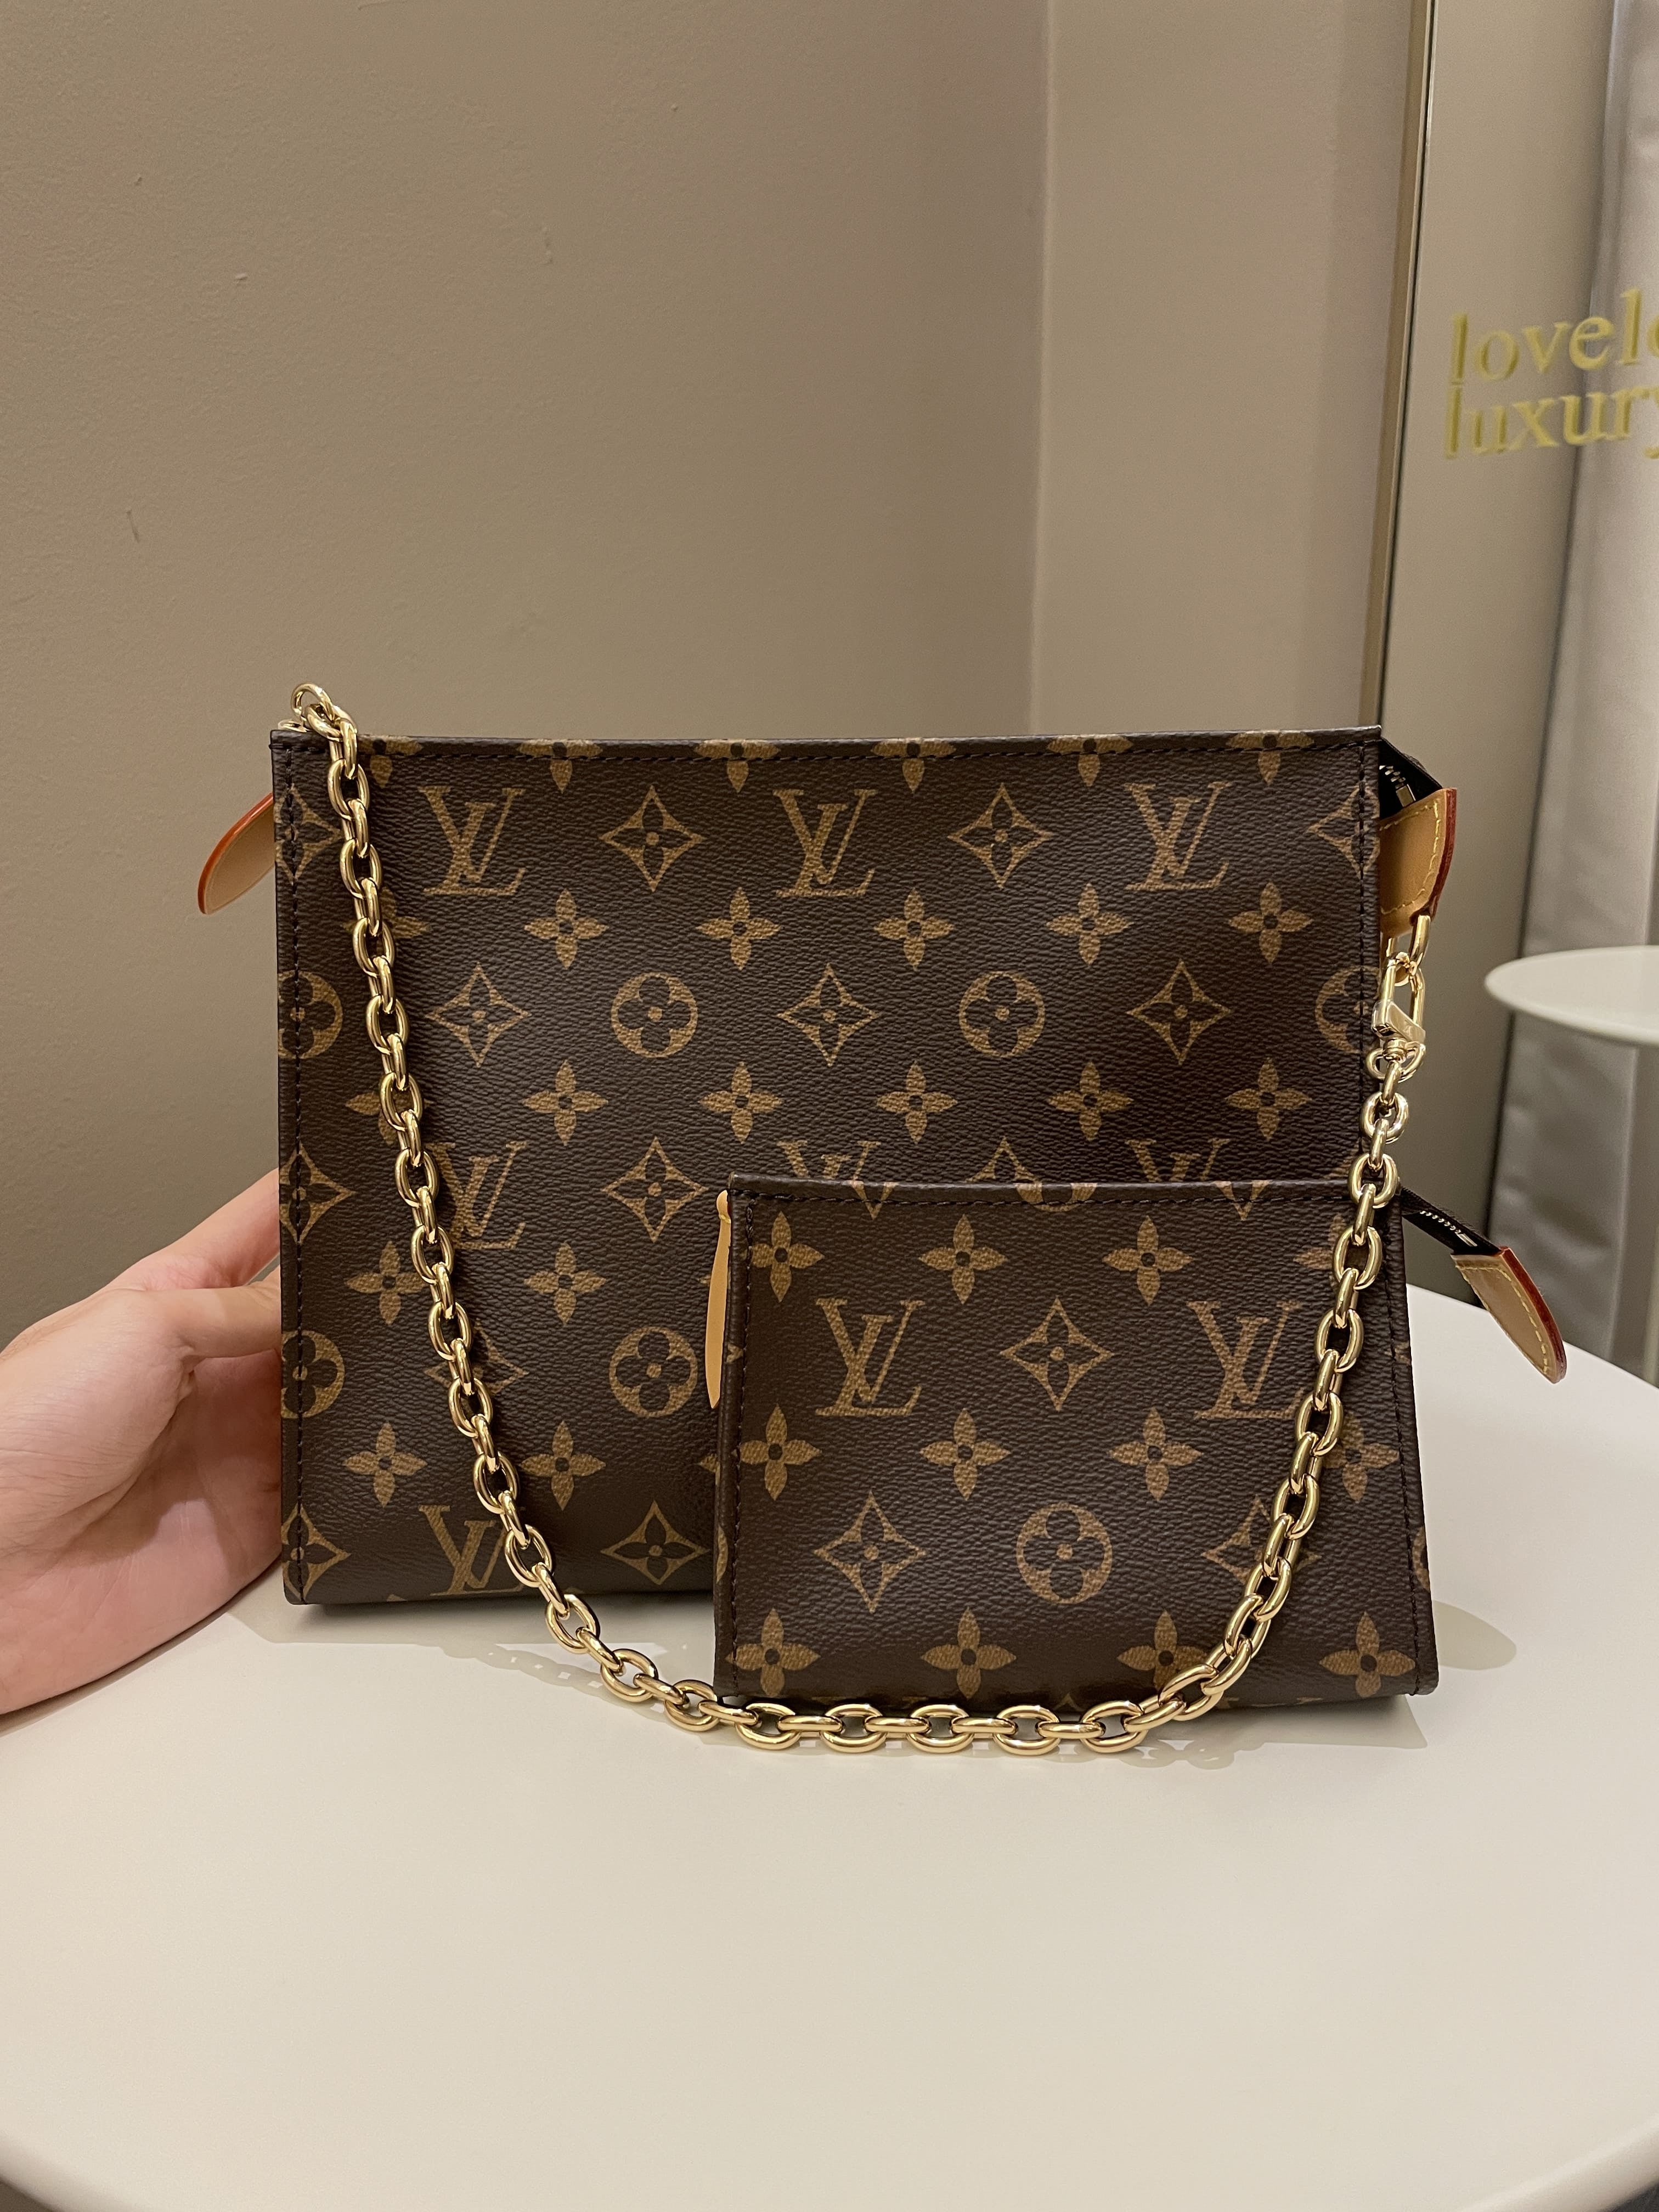 Lv Toiletry Pouch 26 Price Singapore Dollars